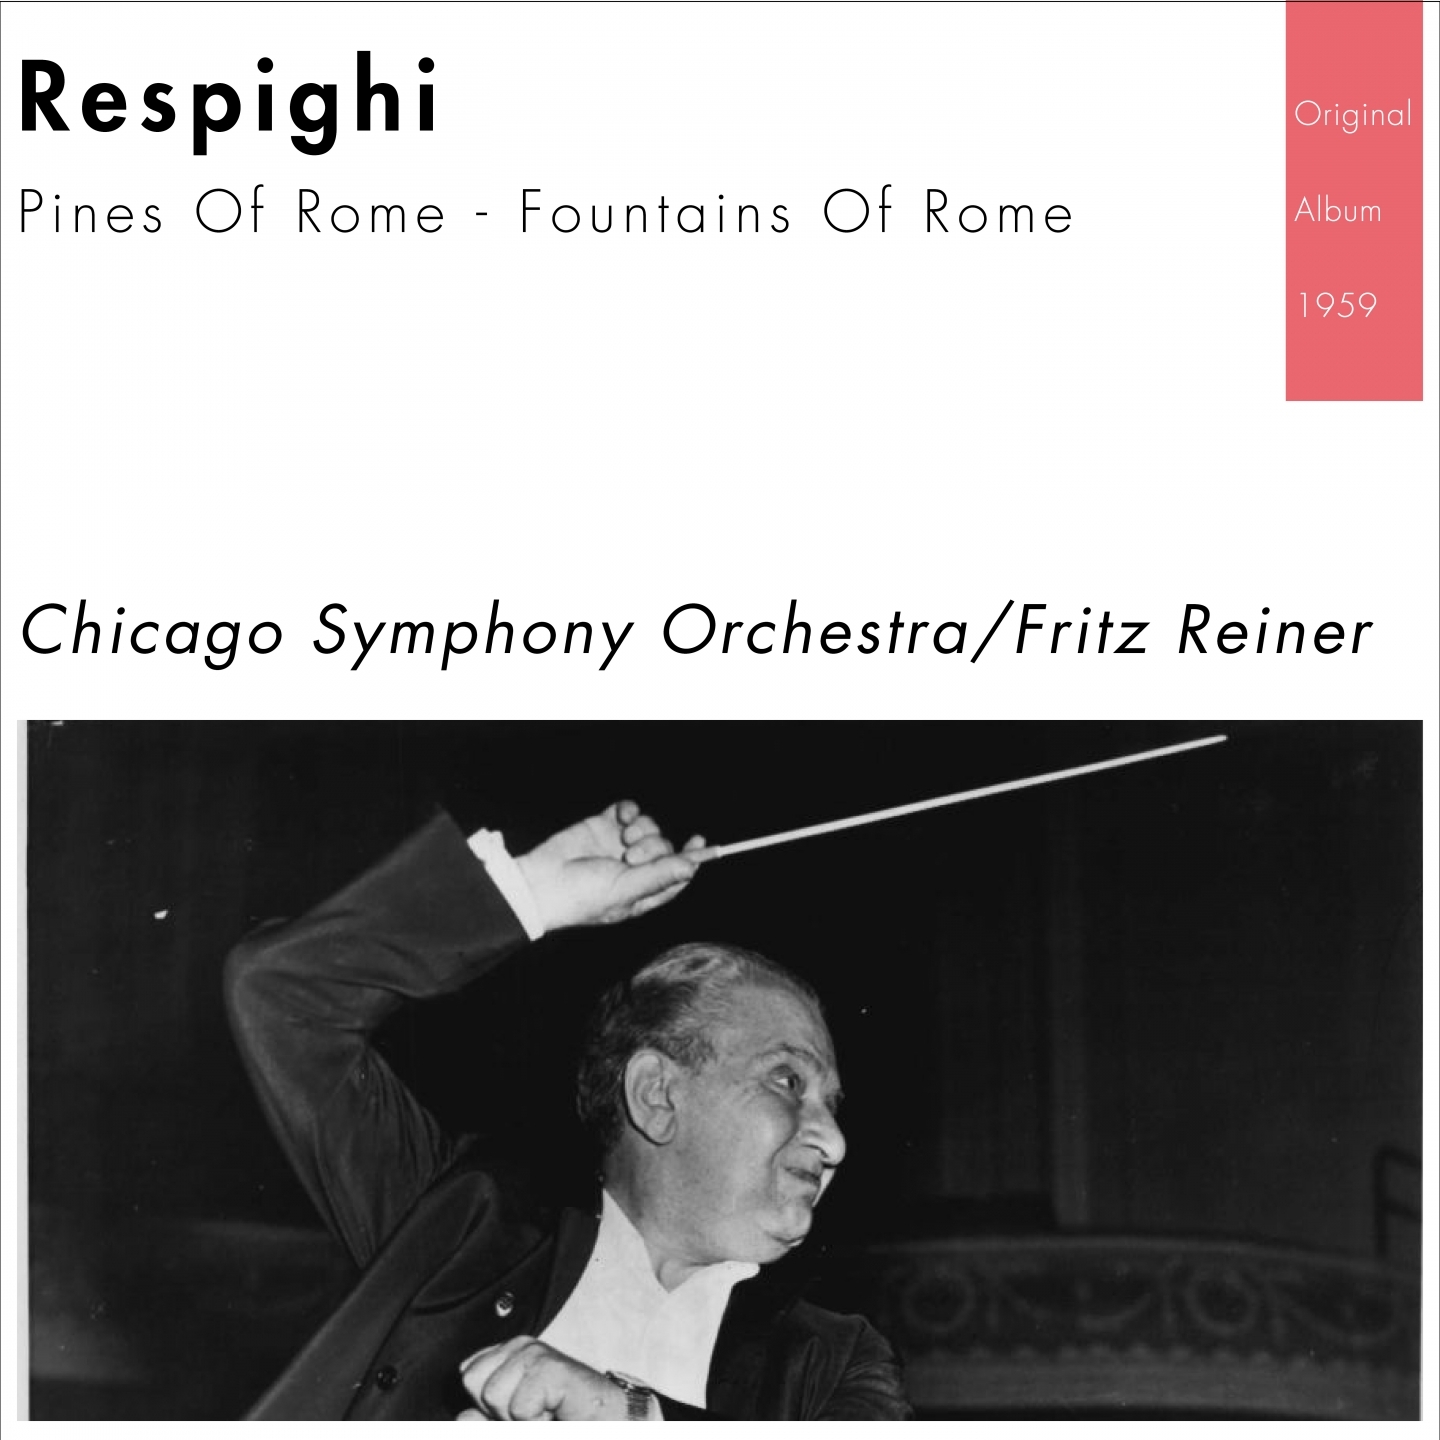 Respighi: Pines of Rome - Fountains of Rome